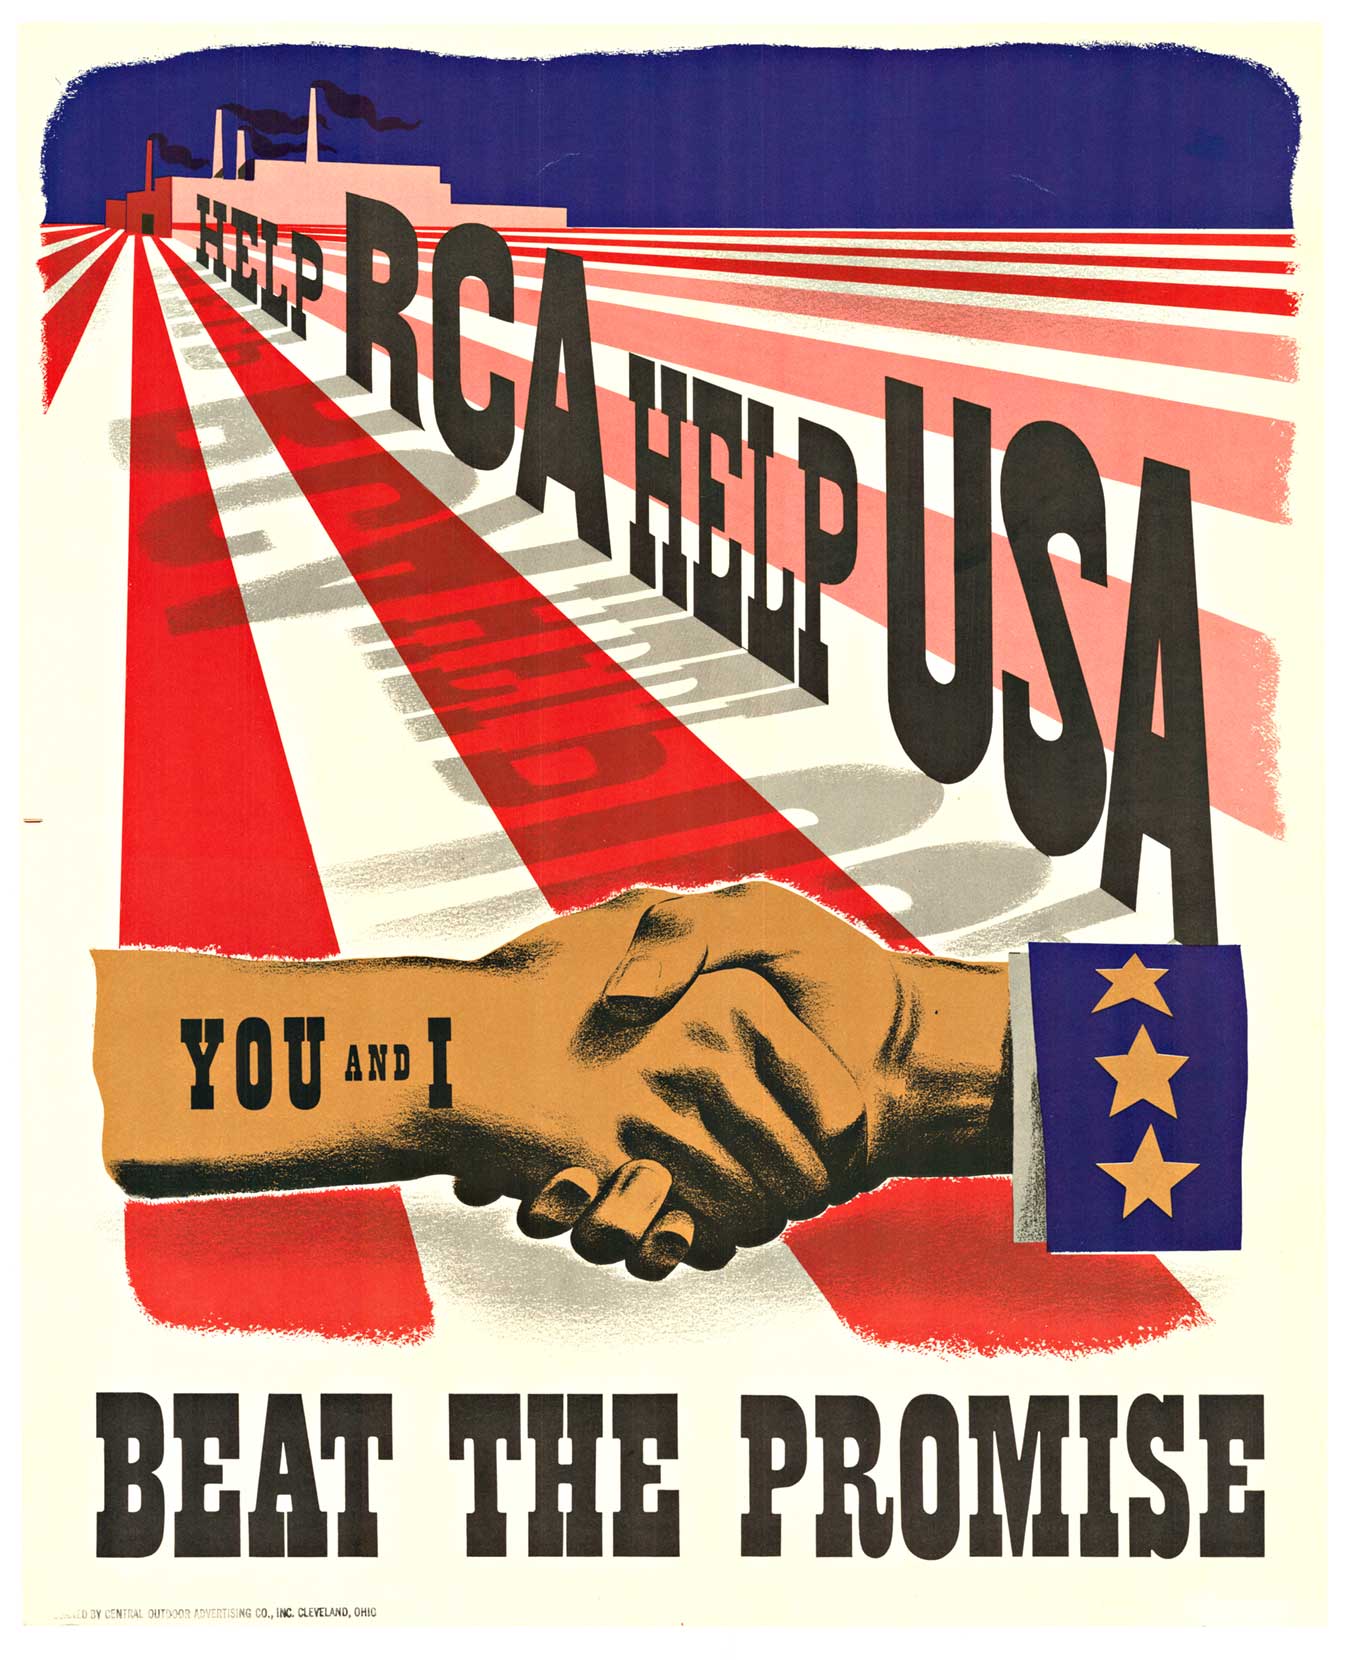 hand shaking hand, red, white, blue, RCA, war defense poster, original, linen backed